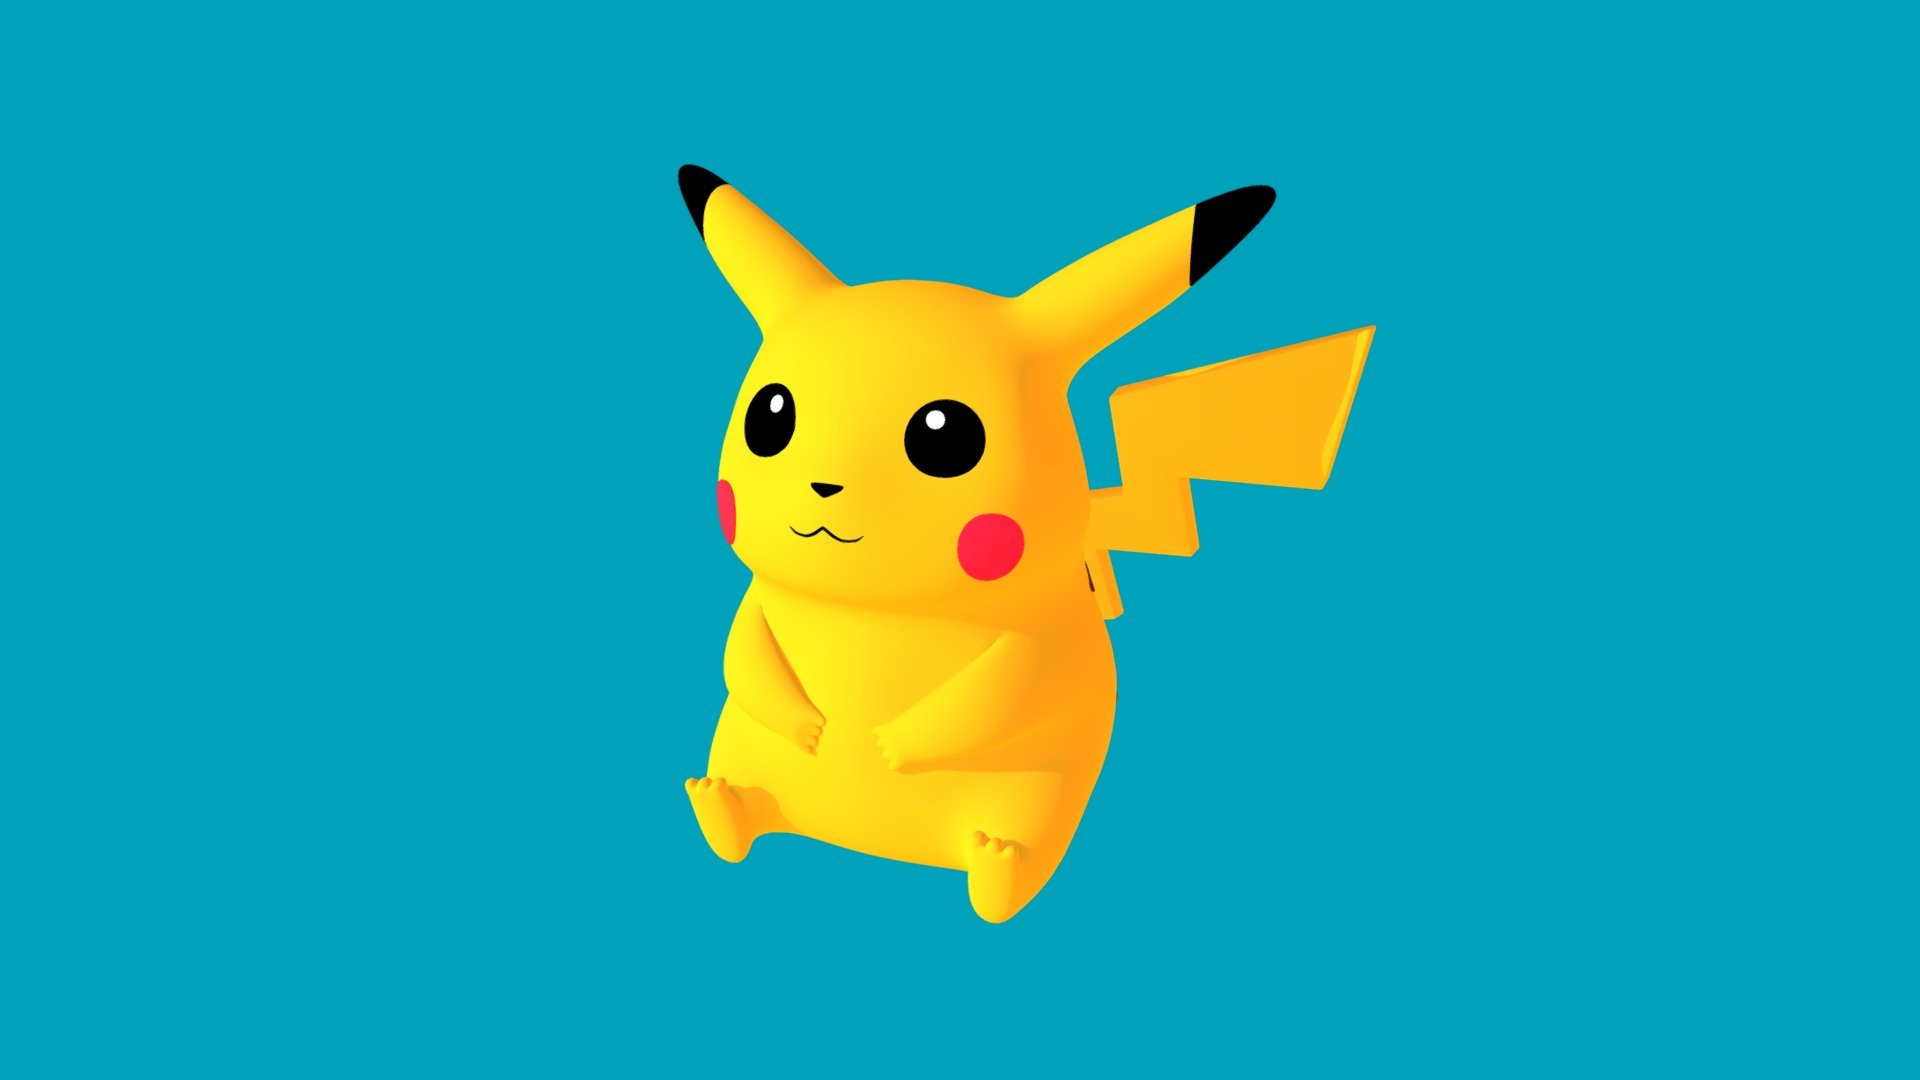 Pikachu fanart 💙

https://www.artstation.com/artwork/q96JED


Includes the blender project file with the same result as the image 3d model